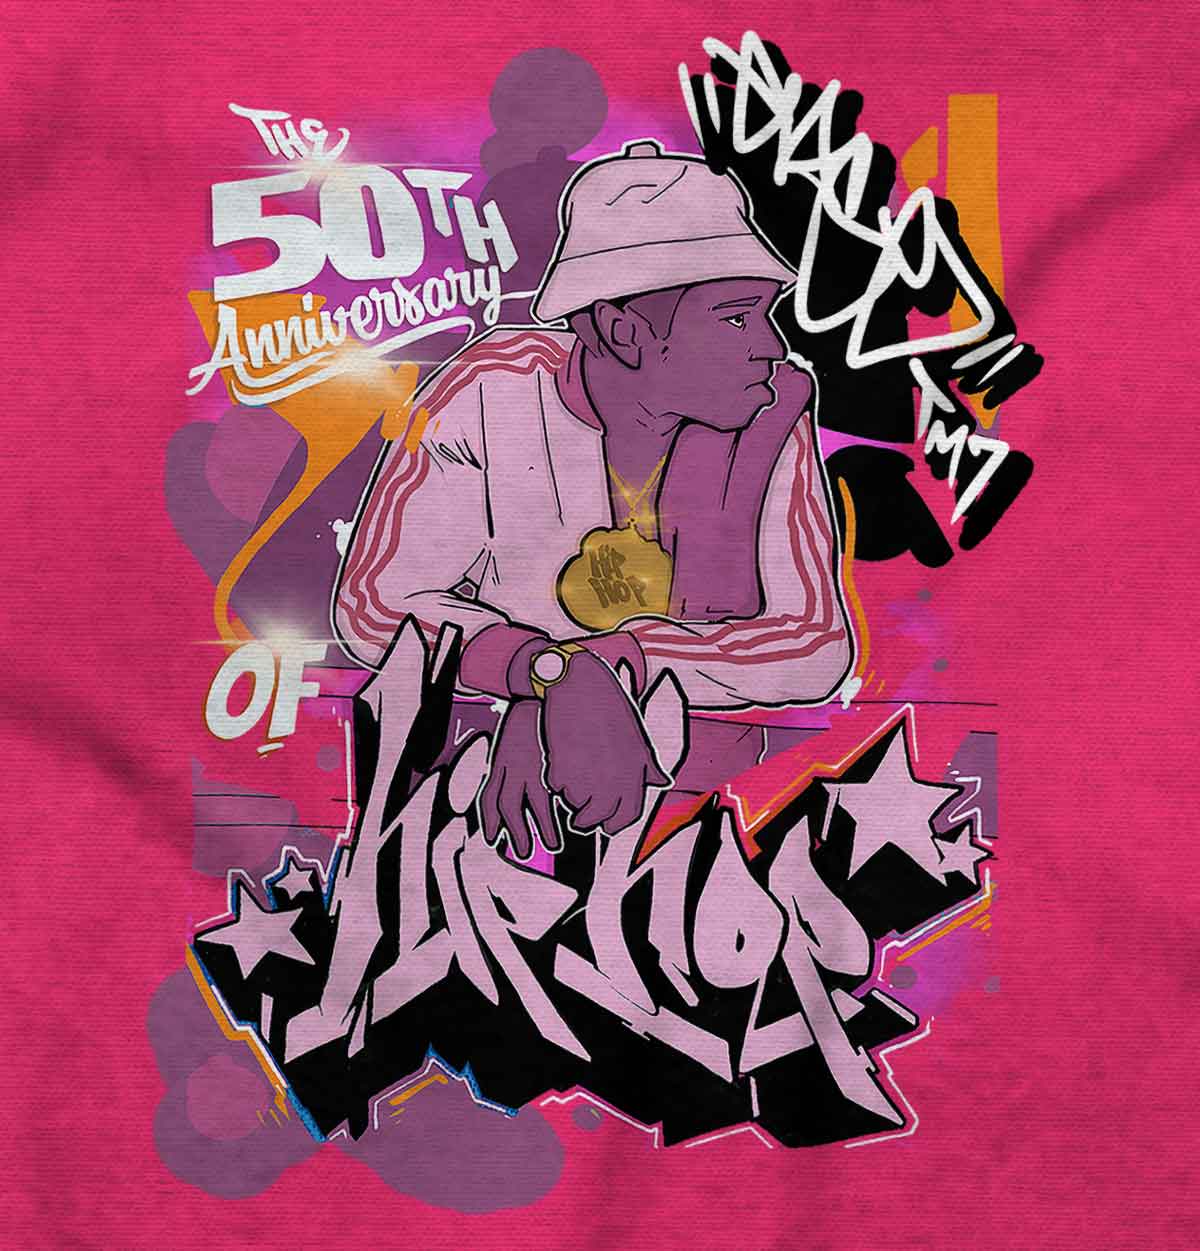 A colorful graffiti art piece that embodies the spirit of hip-hop culture. A tribute to the pioneers of the genre, this design captures the energy and soul of hip-hop.